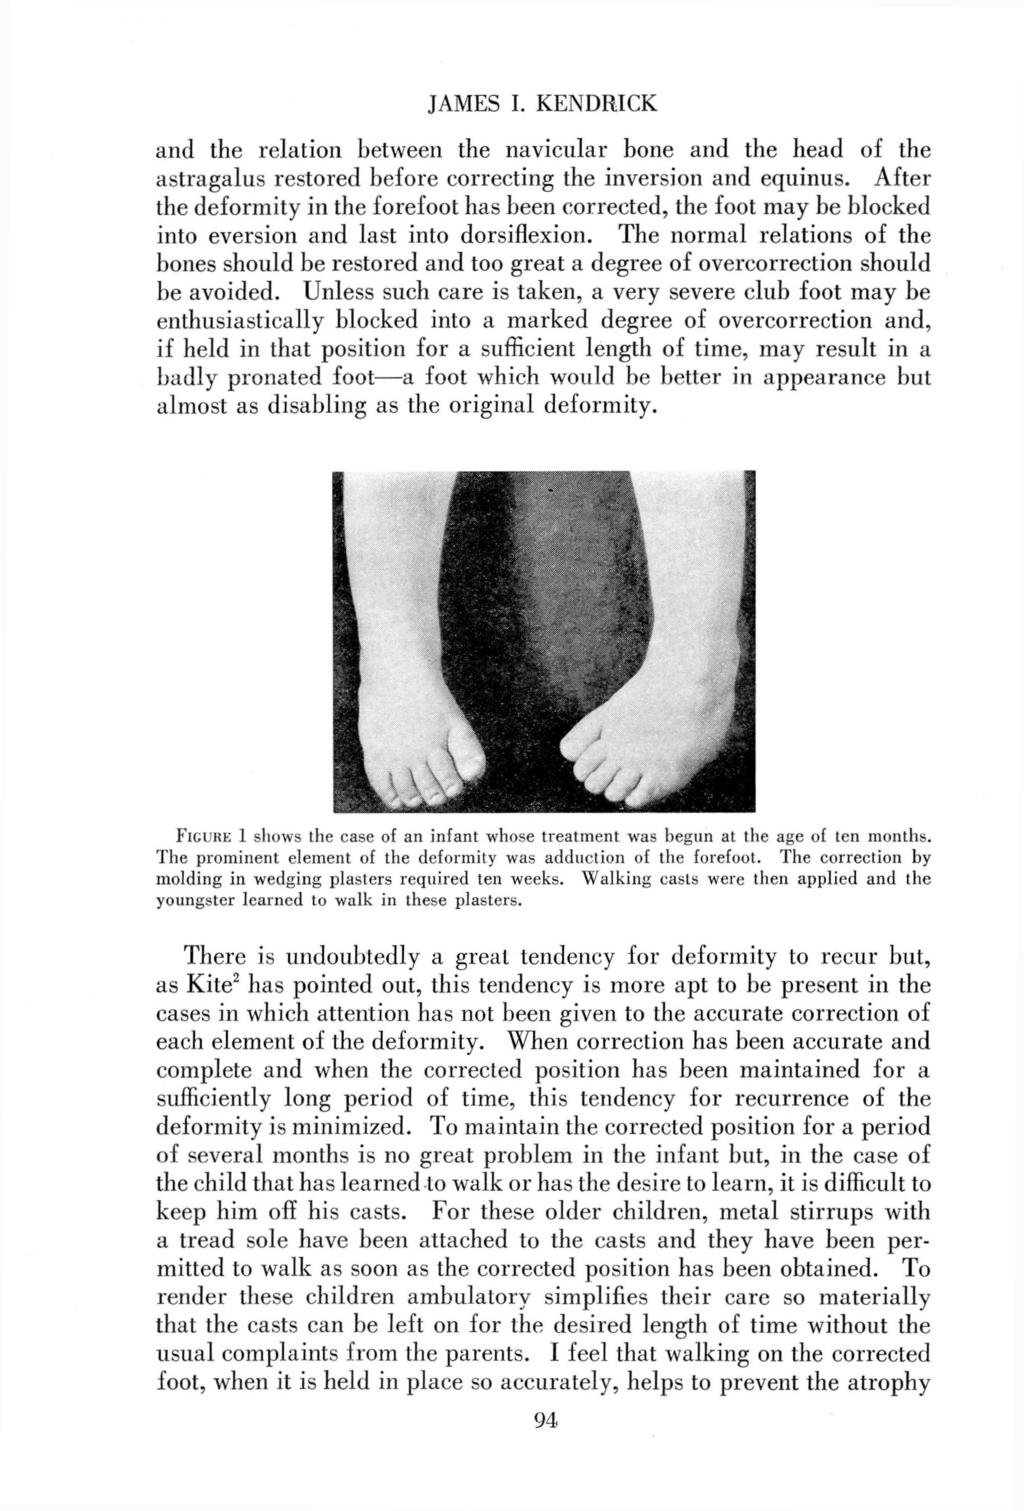 JAMES I. KENDRICK and the relation between the navicular bone and the head of the astragalus restored before correcting the inversion and equinus.